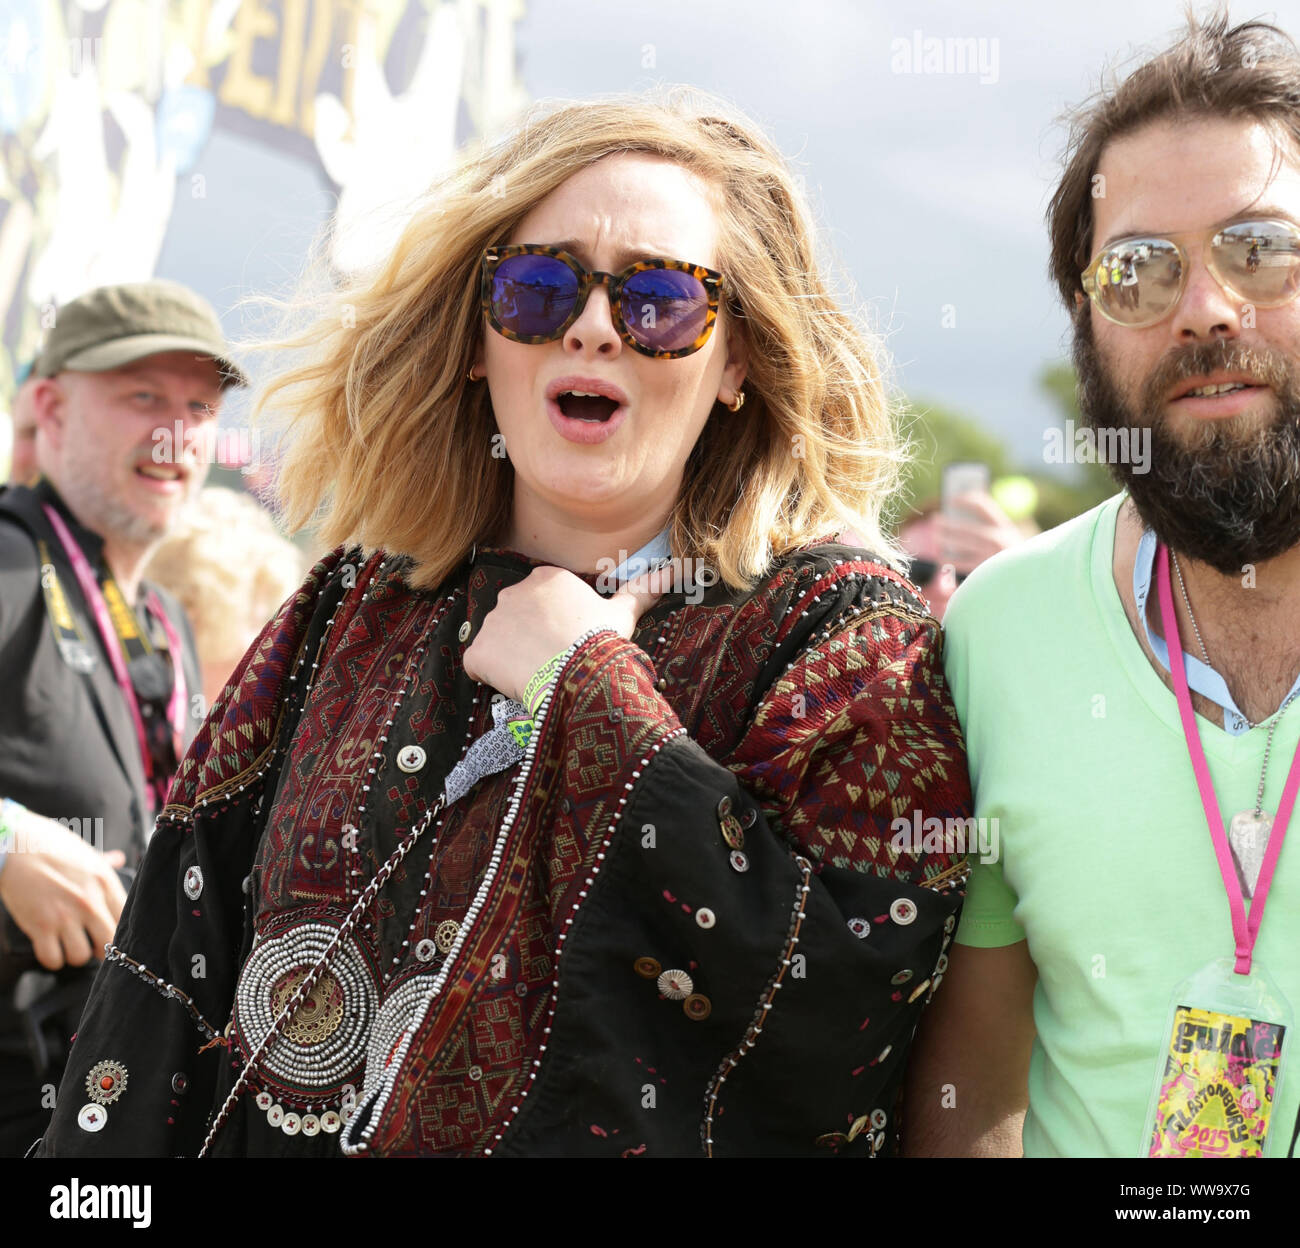 File photo dated 27/06/15 of singer Adele with her husband Simon Konecki. Adele has cited 'irreconcilable differences' in her divorce from her husband, legal papers reveal. Stock Photo